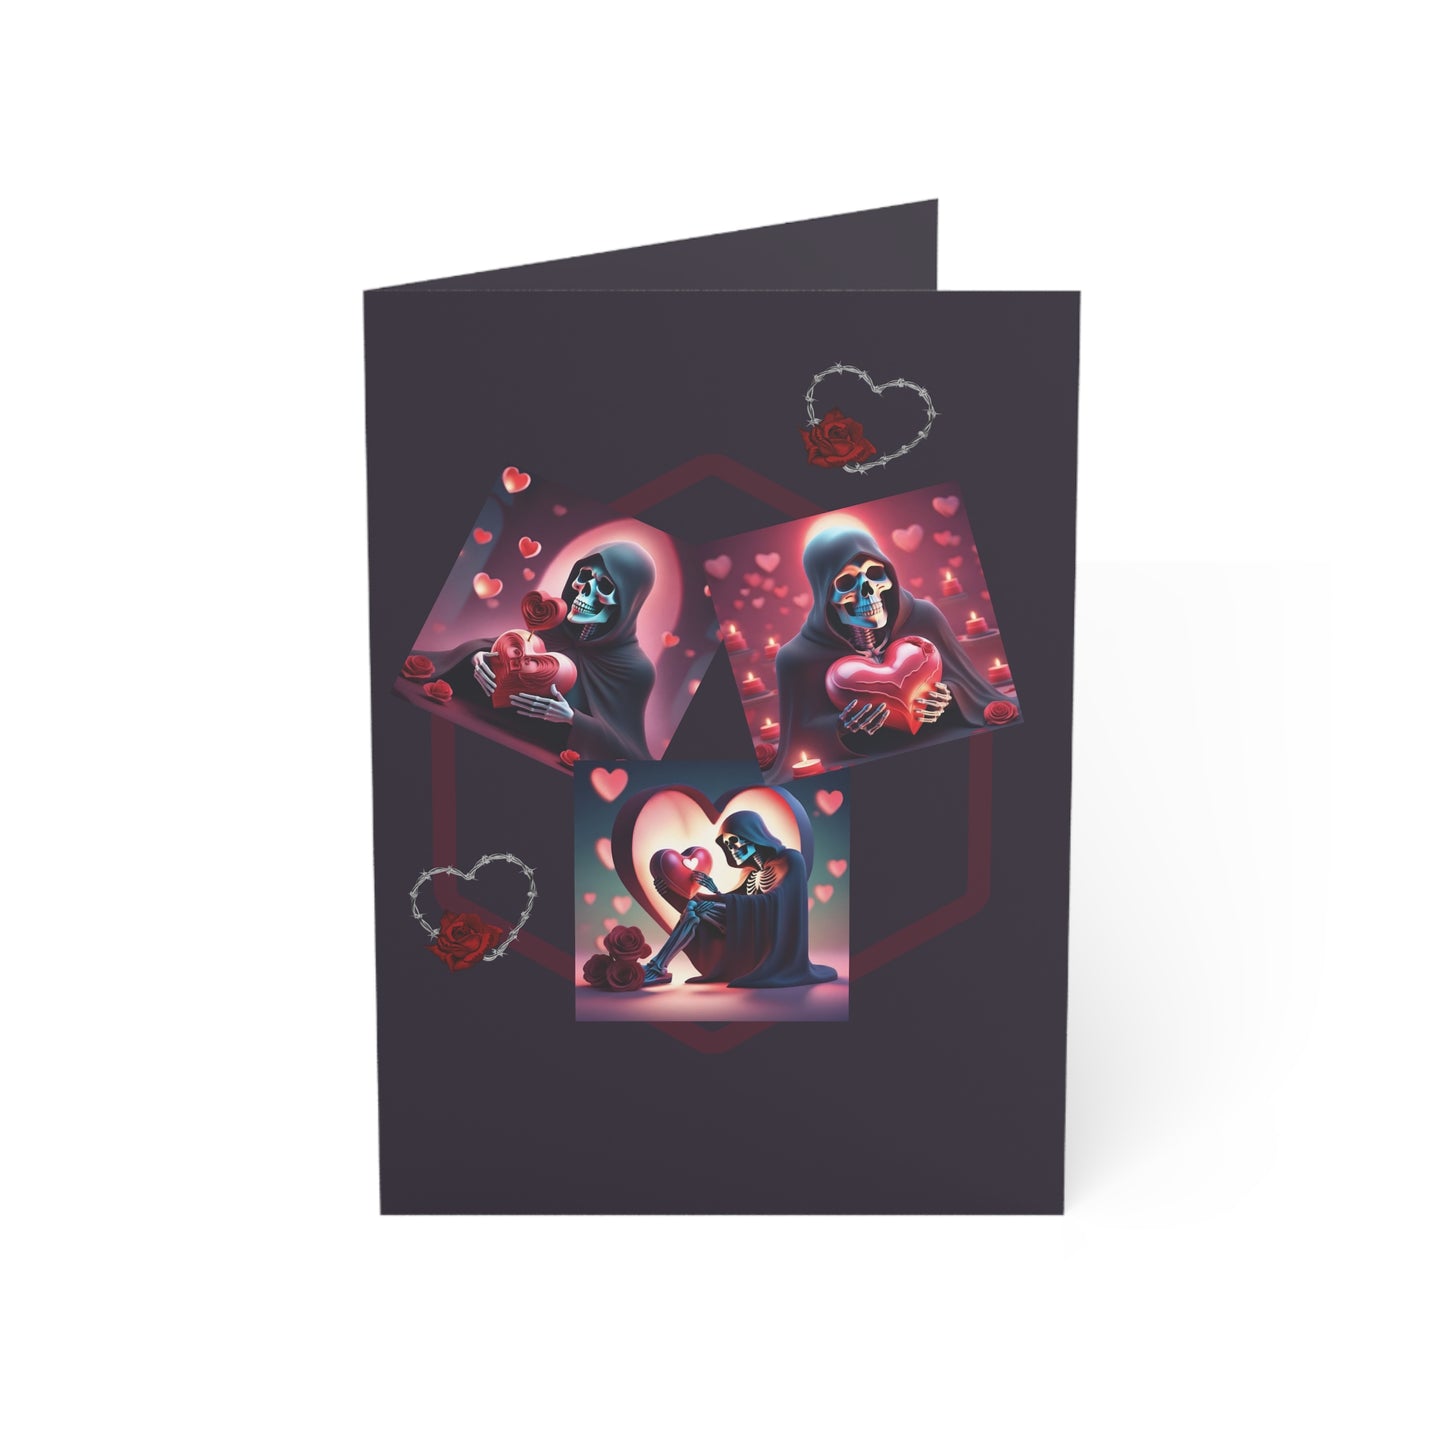 Love Ya, To Death Greeting Cards (1, 10, 30, and 50pcs)